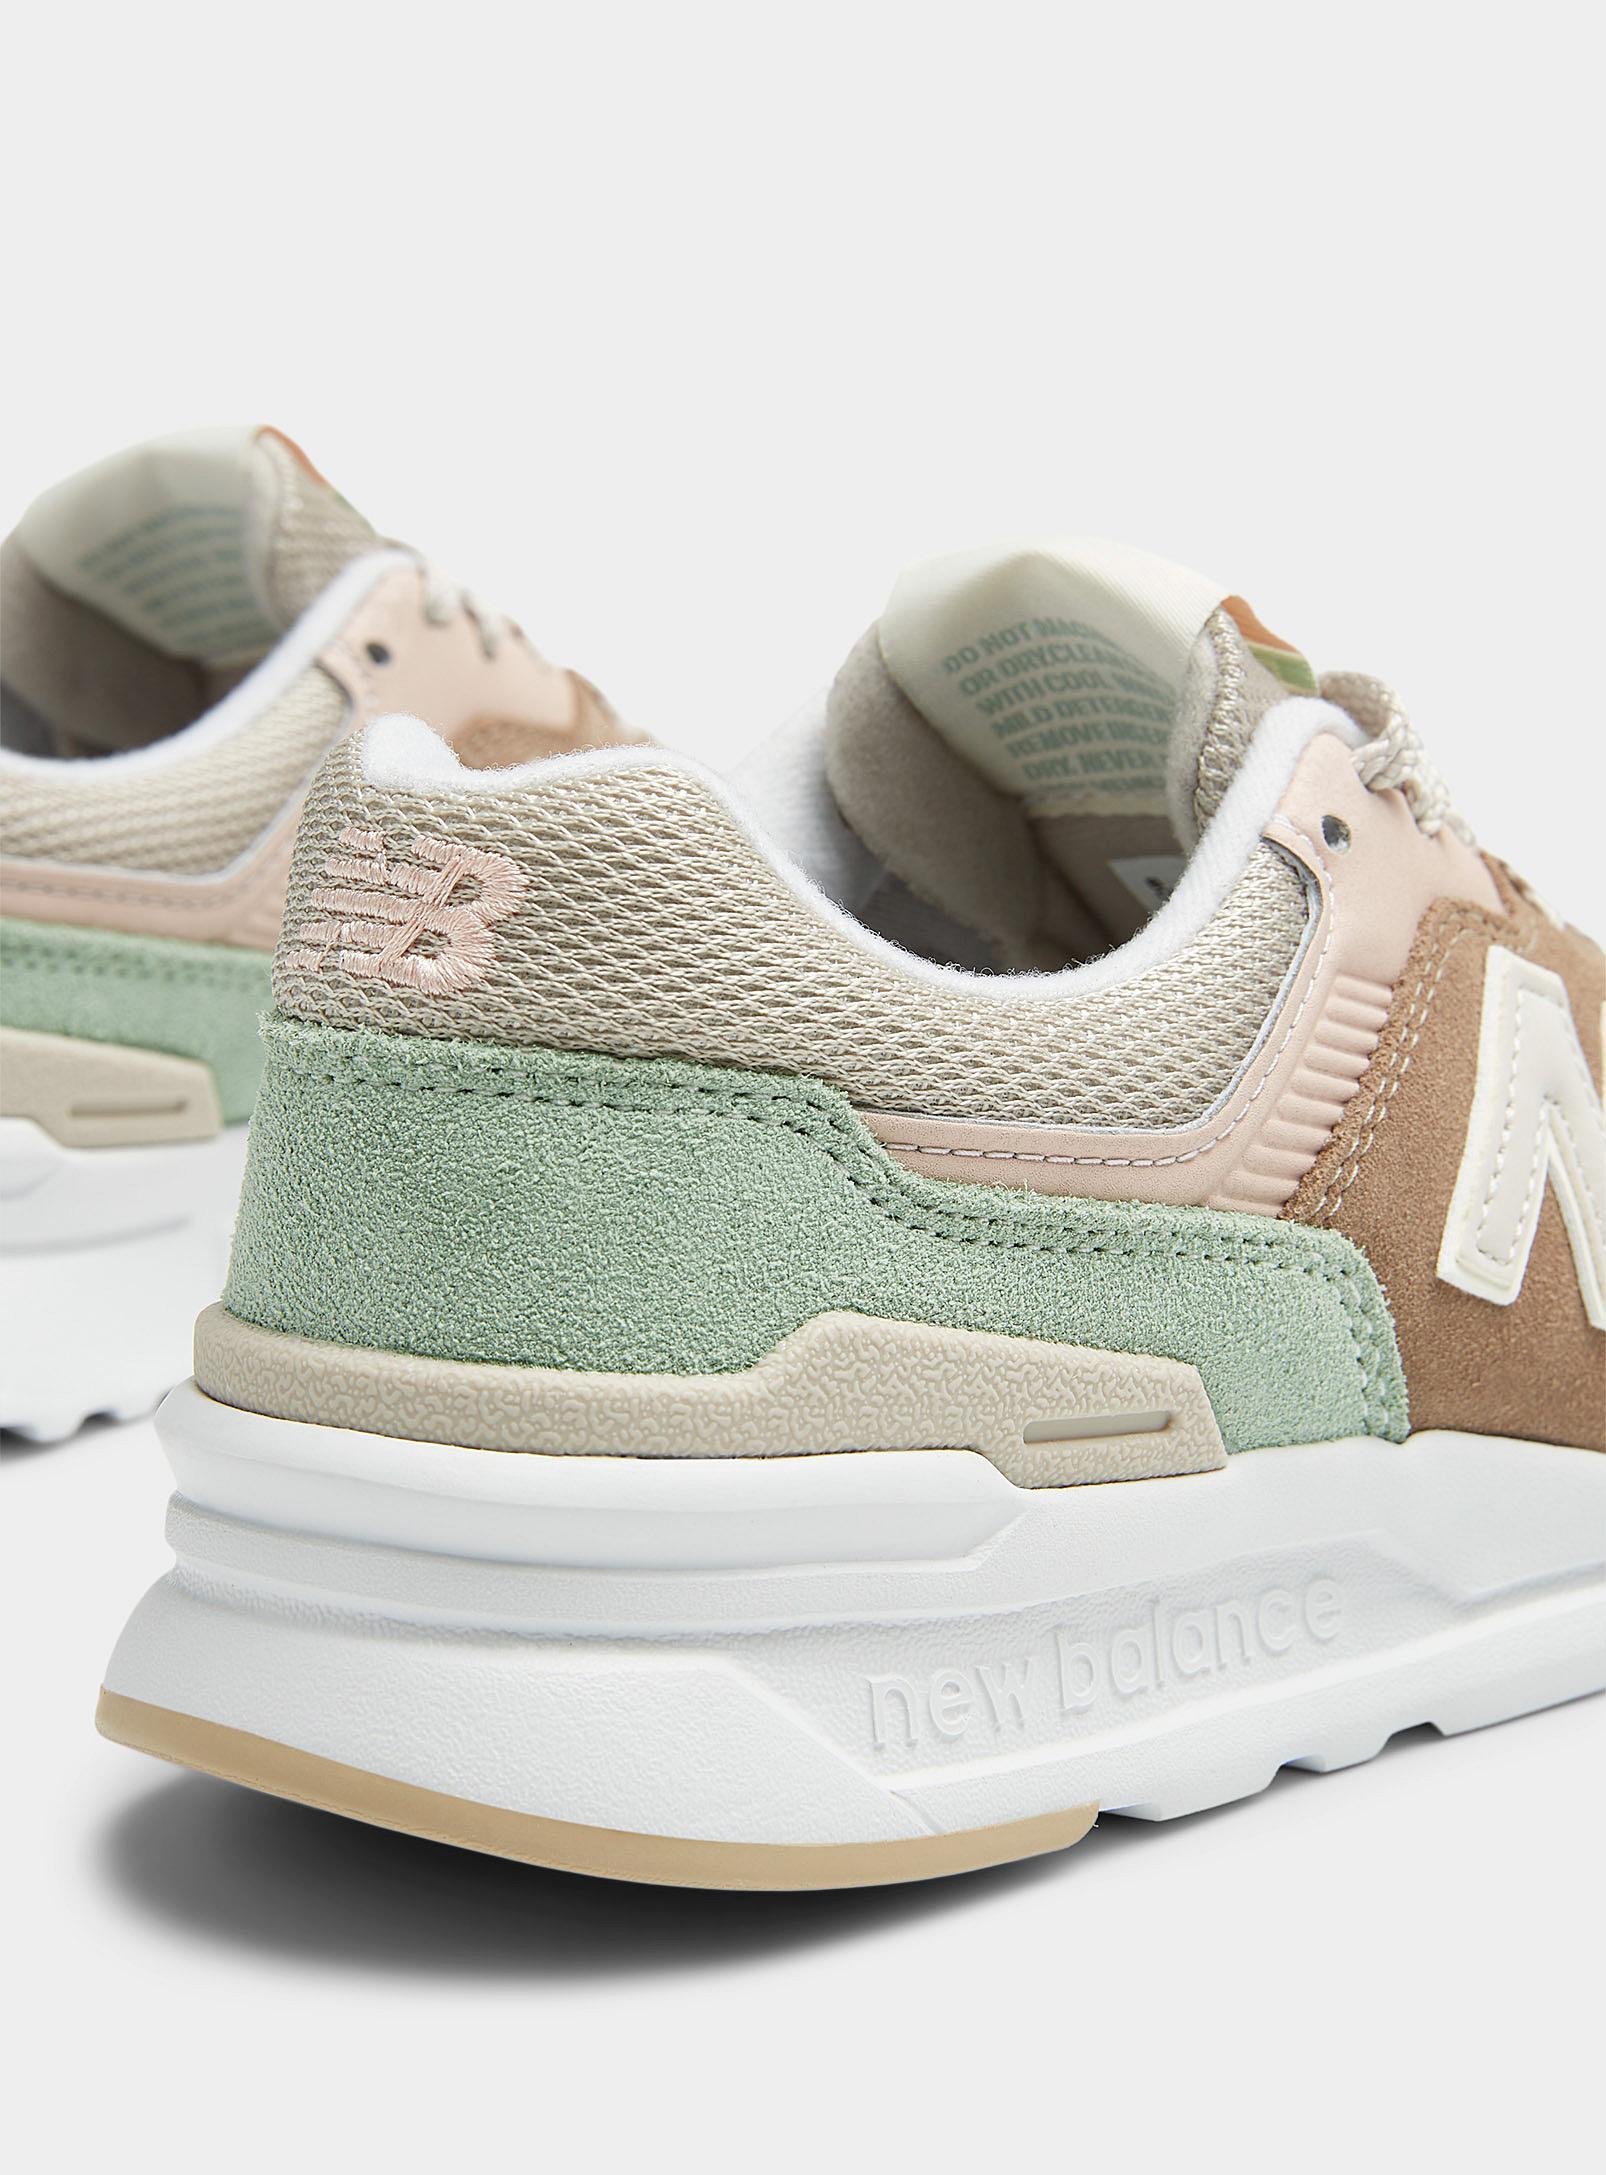 New Balance 997h Pastel Sneakers Women in Natural | Lyst